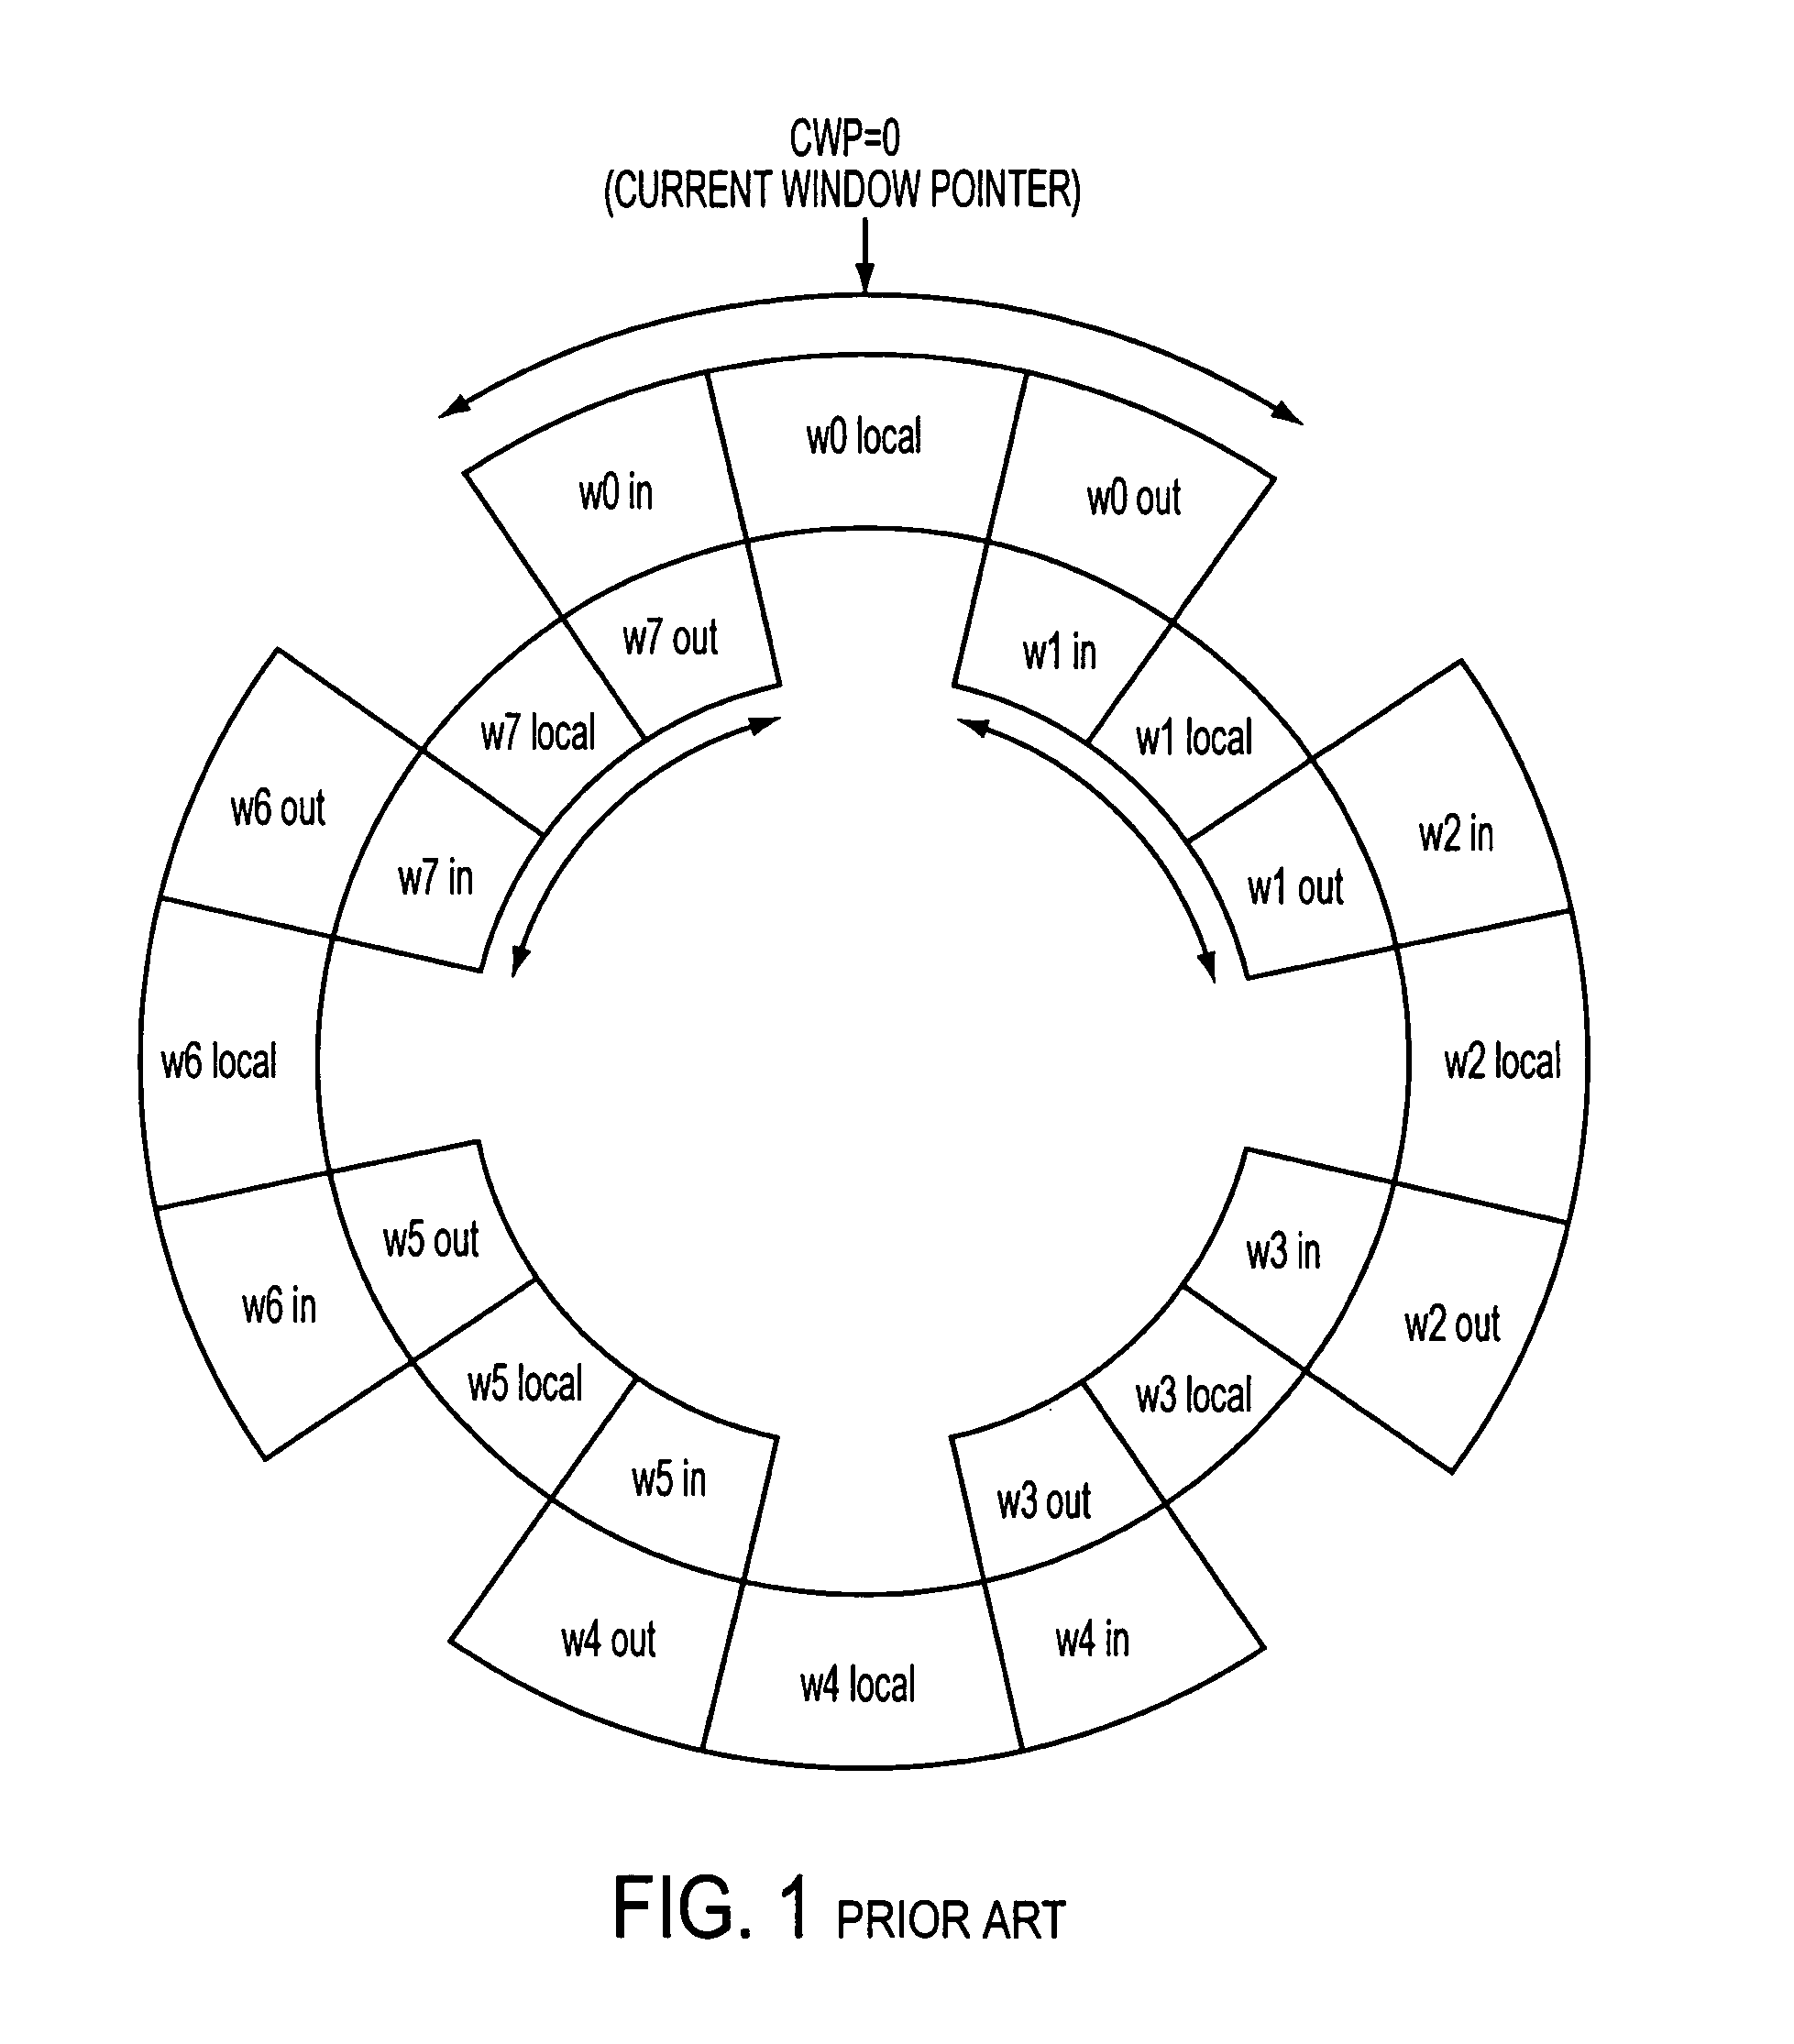 Register file in the register window system and controlling method thereof